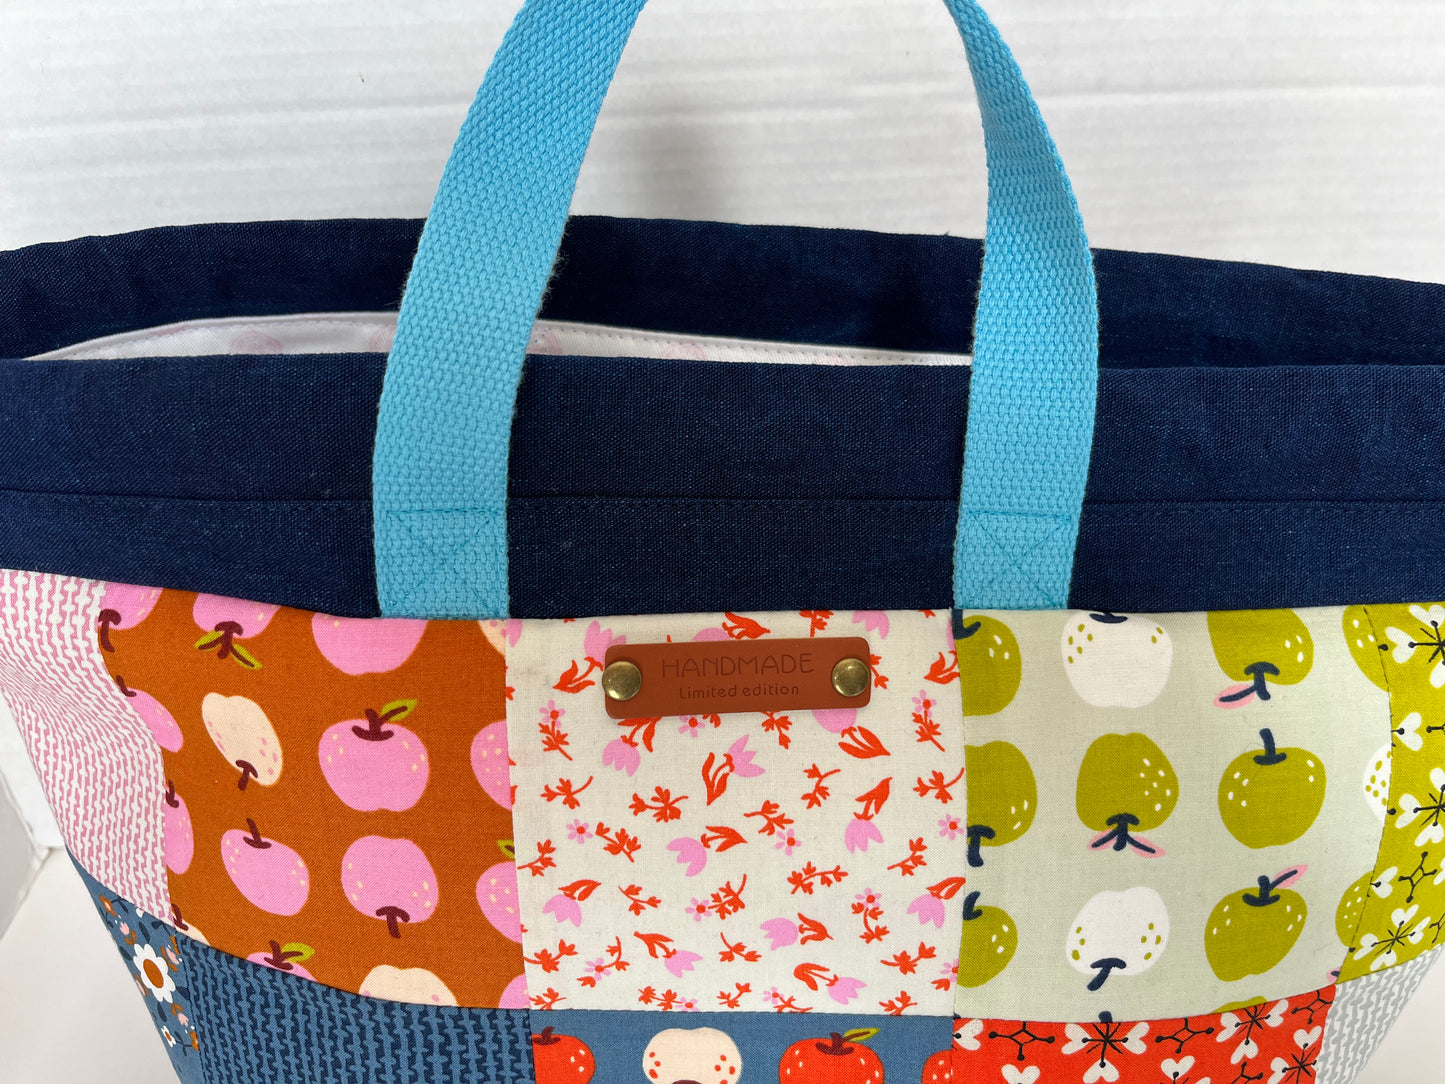 Patchwork and Denim Large Knitting Project Bag